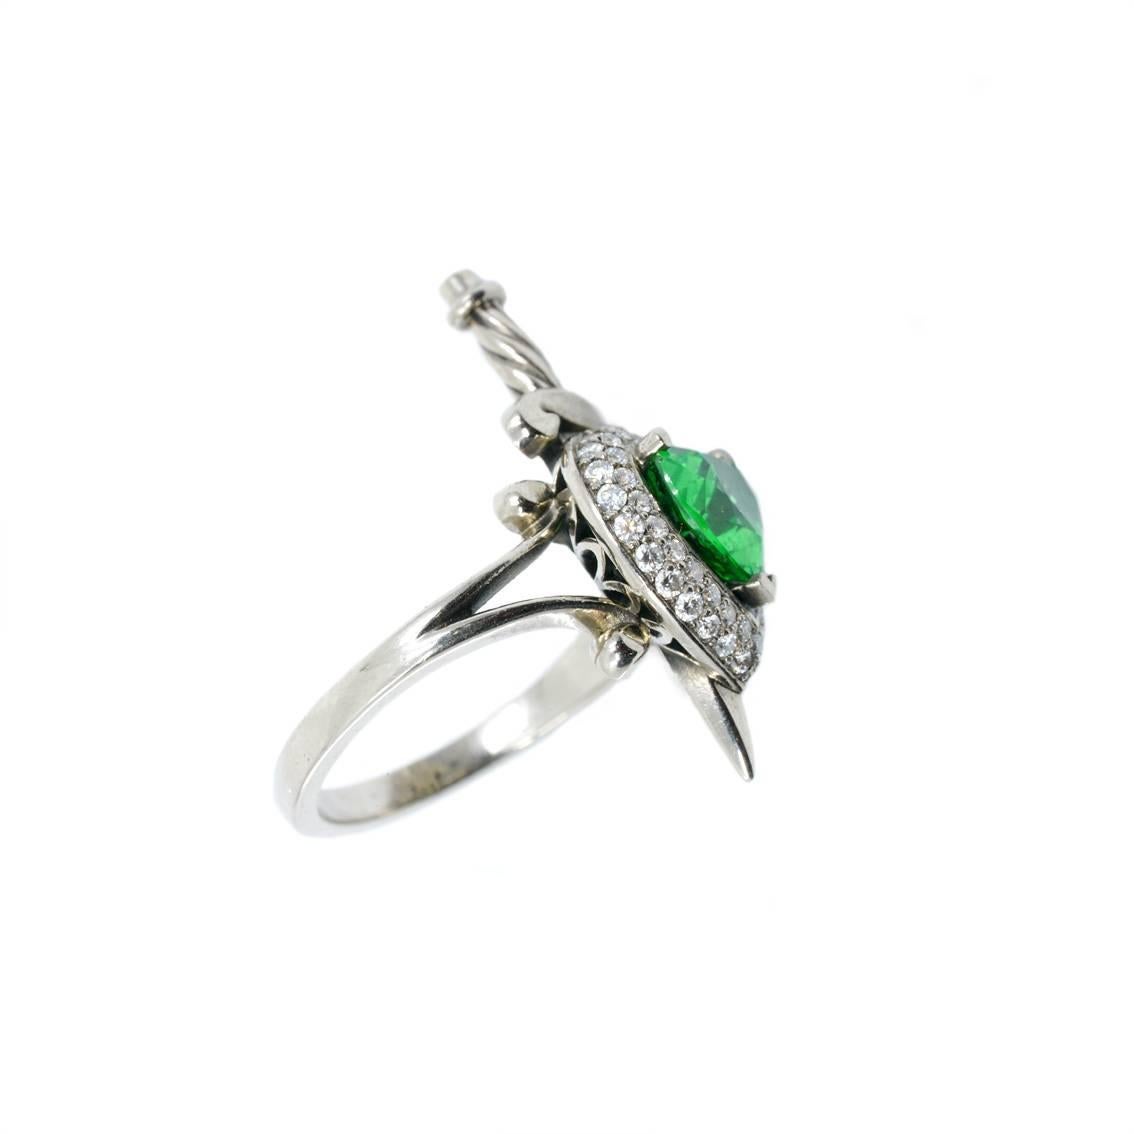 This luxurious Heart and Dagger ring has been handmade from 18kt white gold and features a central, heart cut, Tsavorite garnet, approximately 1.50ct in weight and vivid green in colour. 

A vibrant halo surrounds this astounding stone, made up of